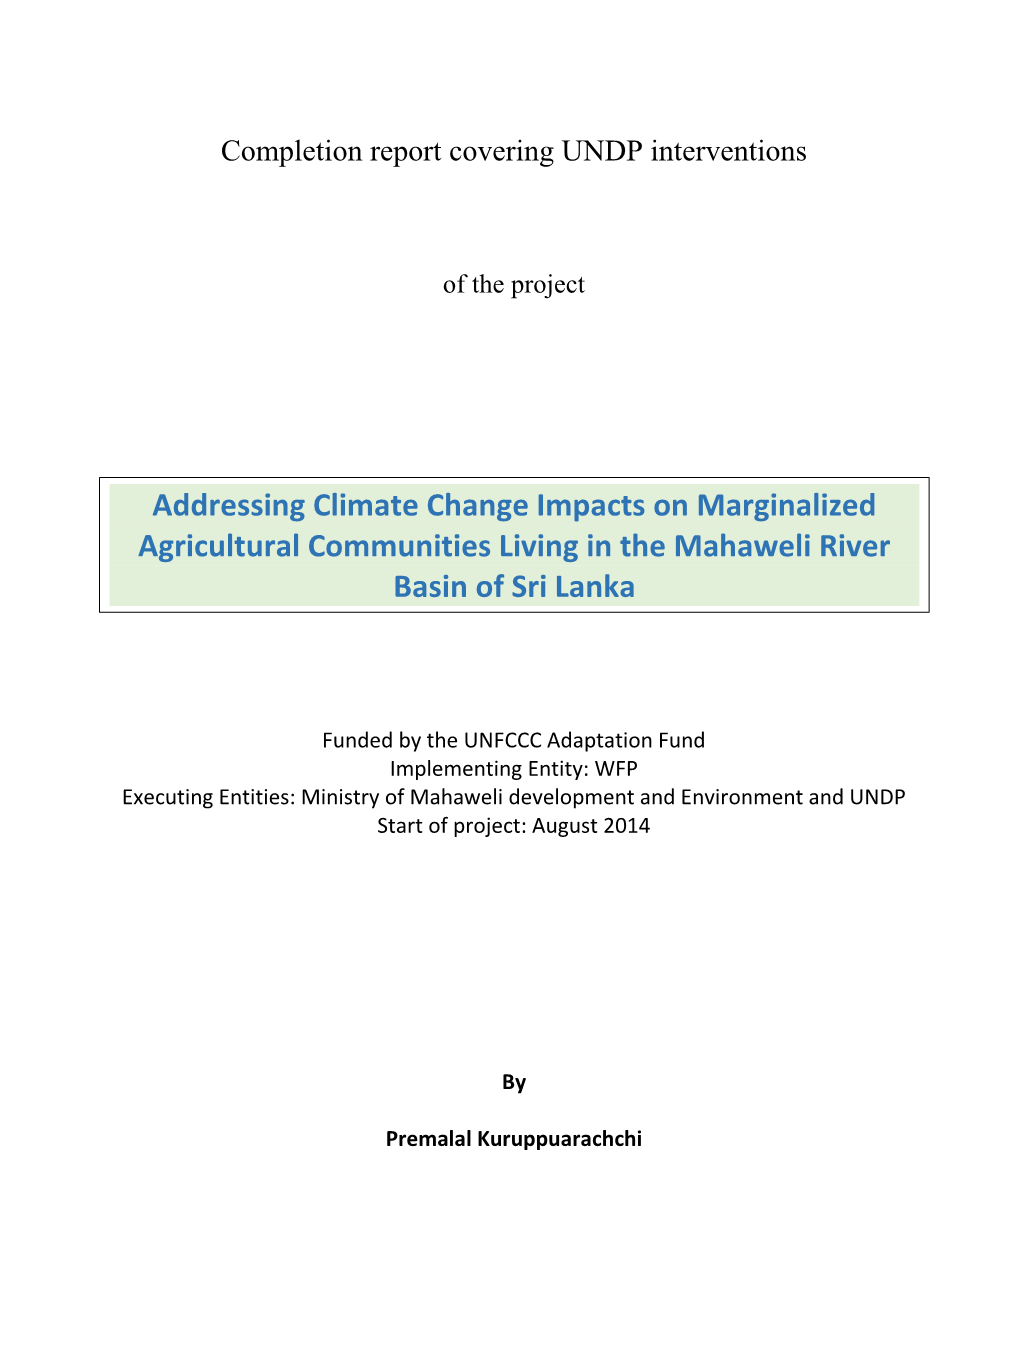 Addressing Climate Change Impacts on Marginalized Agricultural Communities Living in the Mahaweli River Basin of Sri Lanka